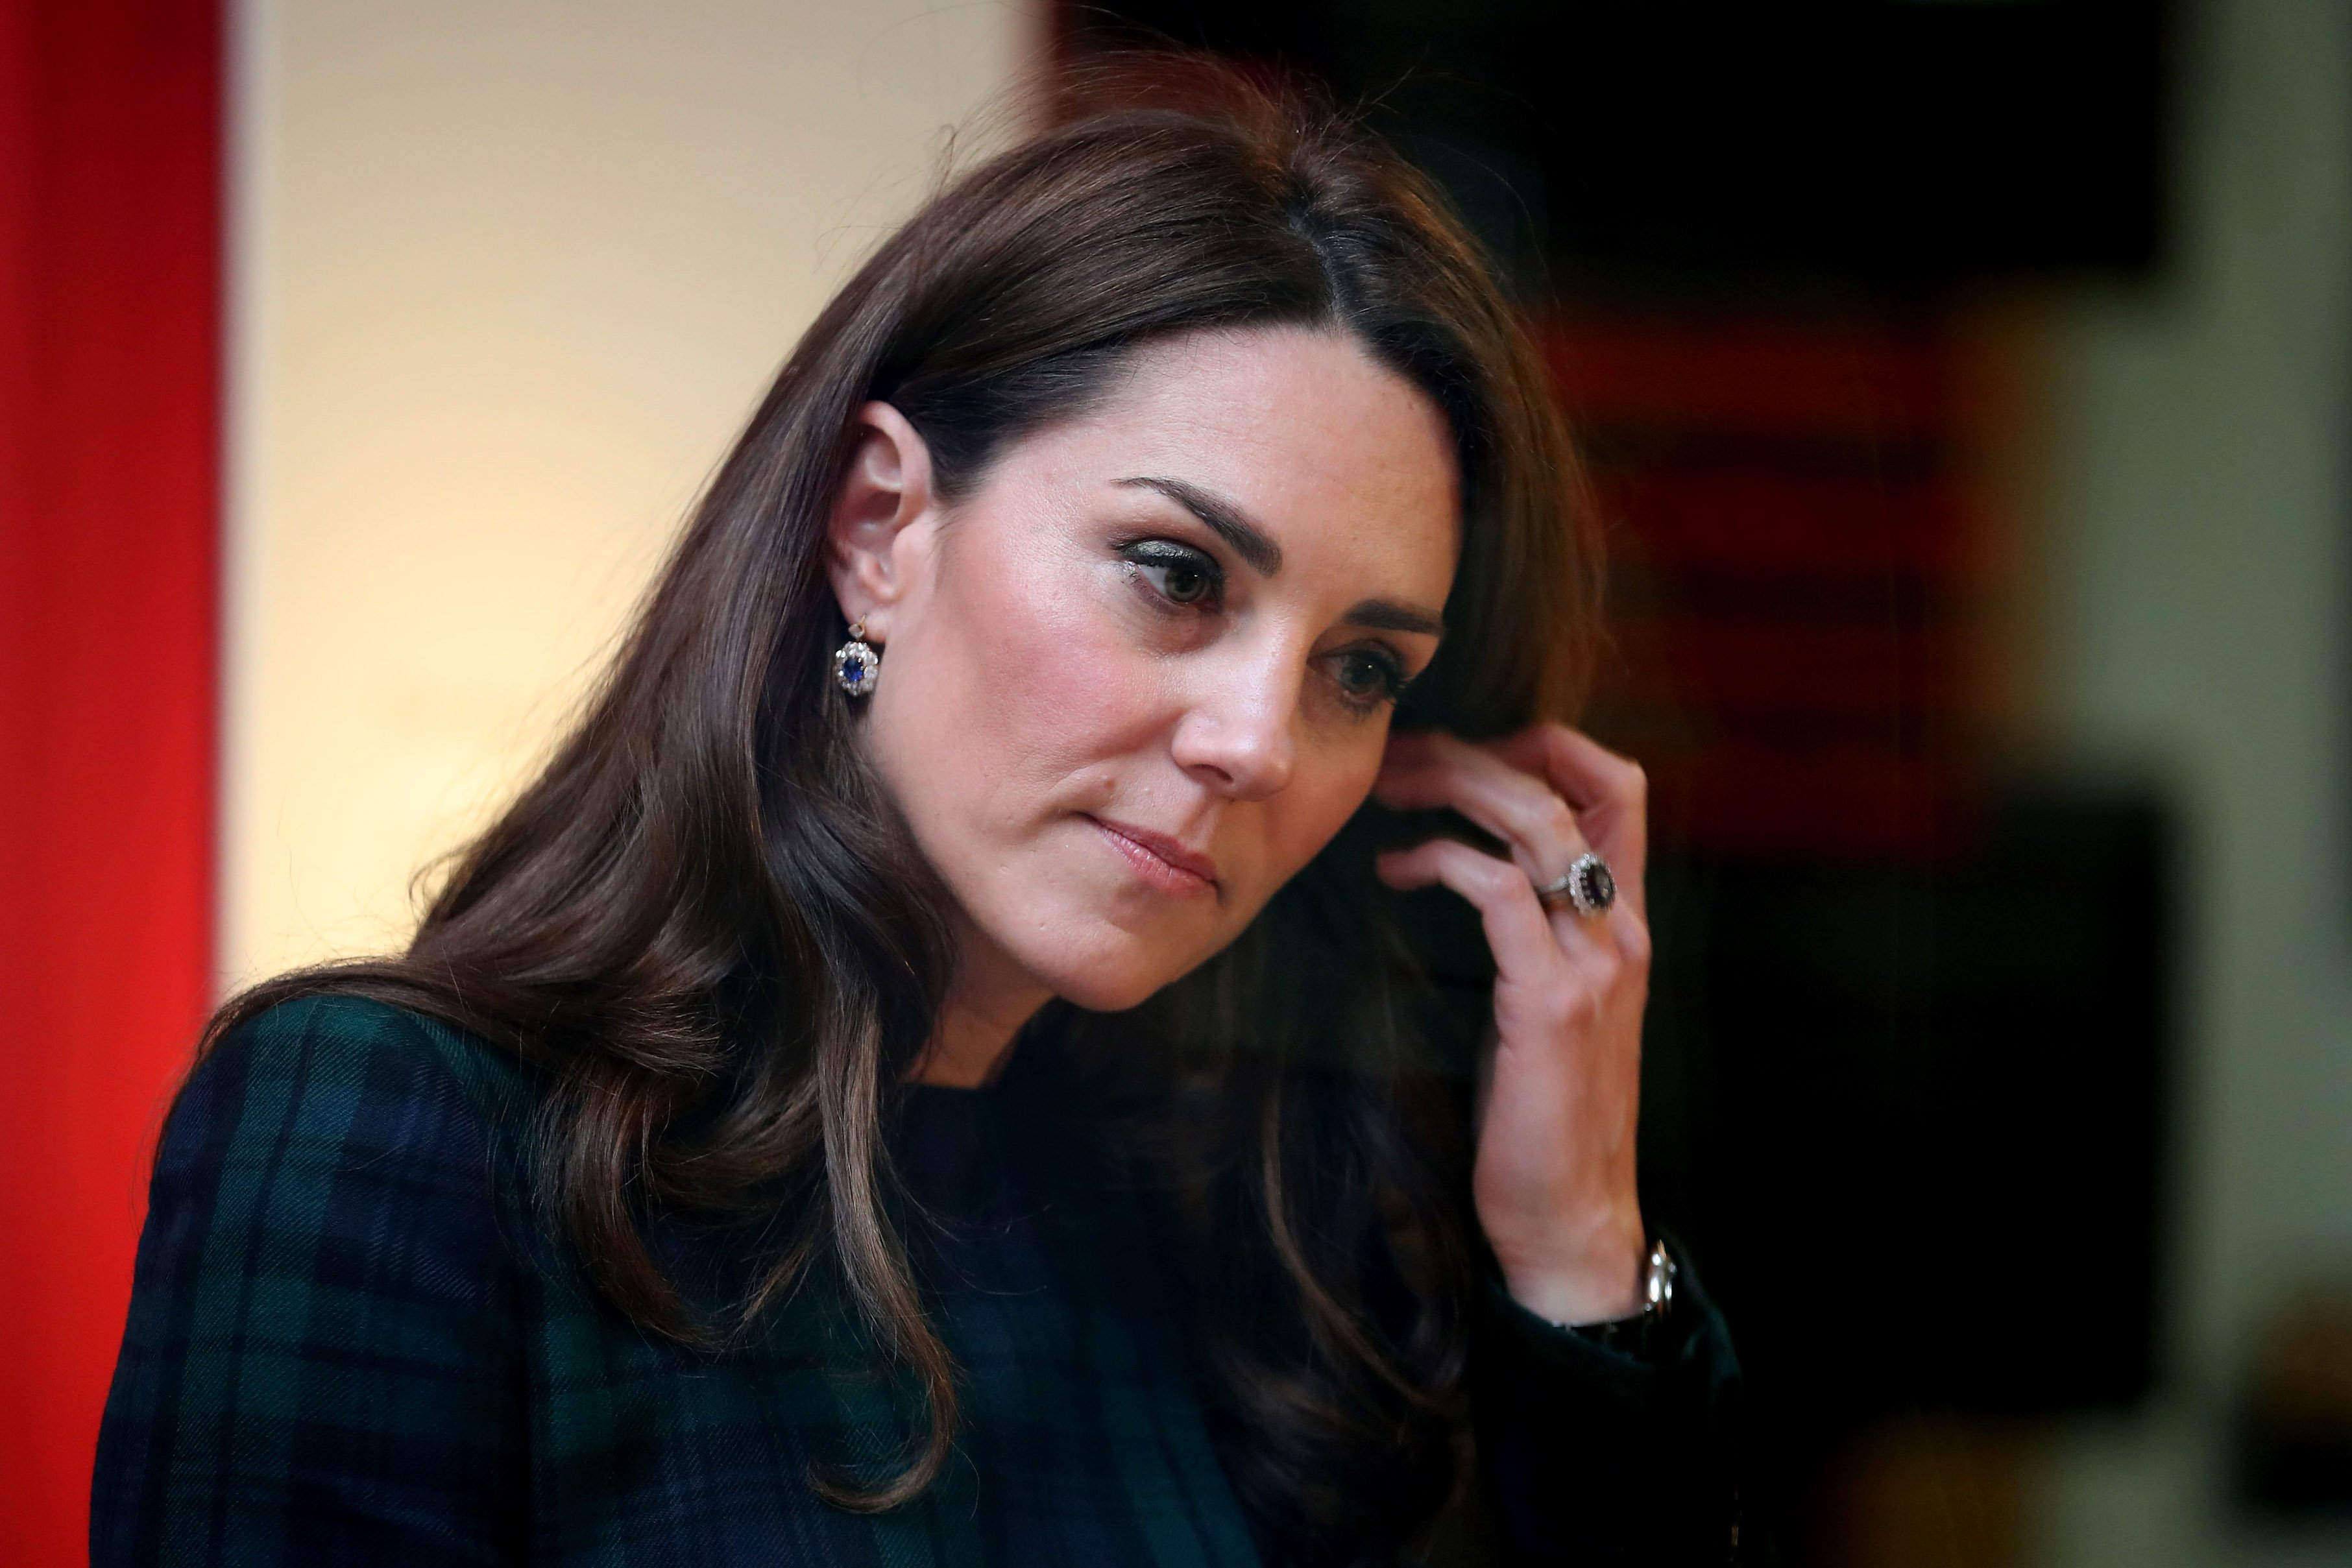 Kate Middleton touches her hair and looks away.